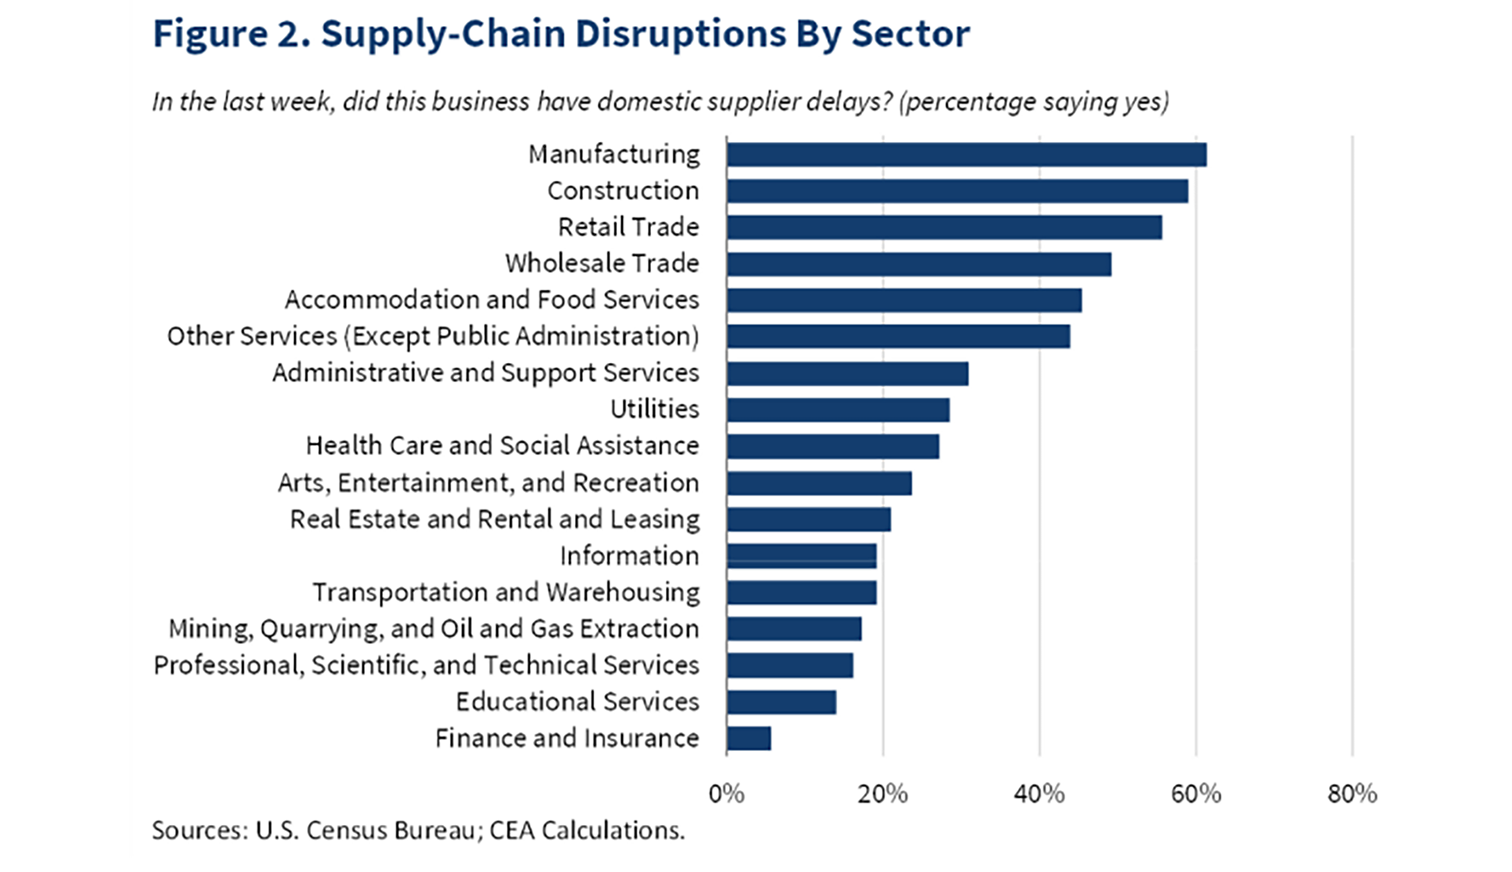 Supply chain disruptions